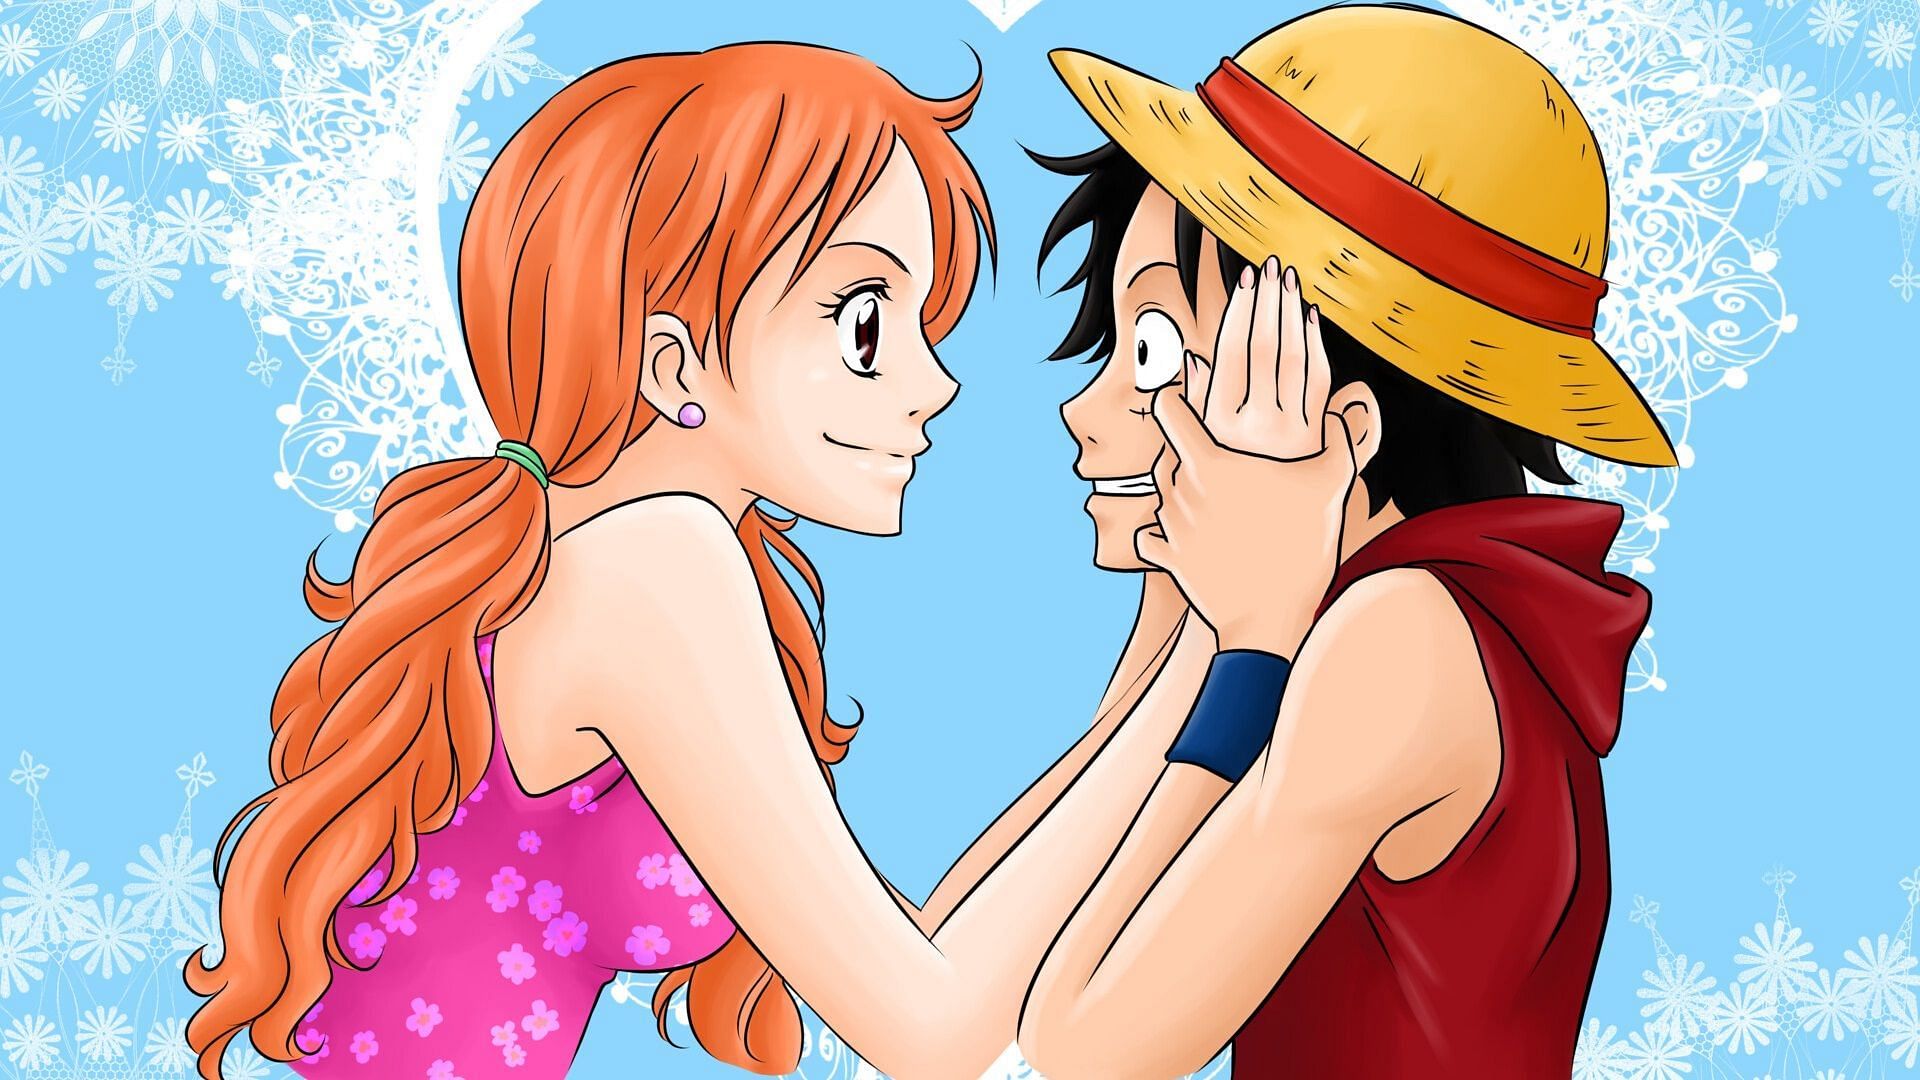 one piece live action Nami crying episode｜TikTok Search